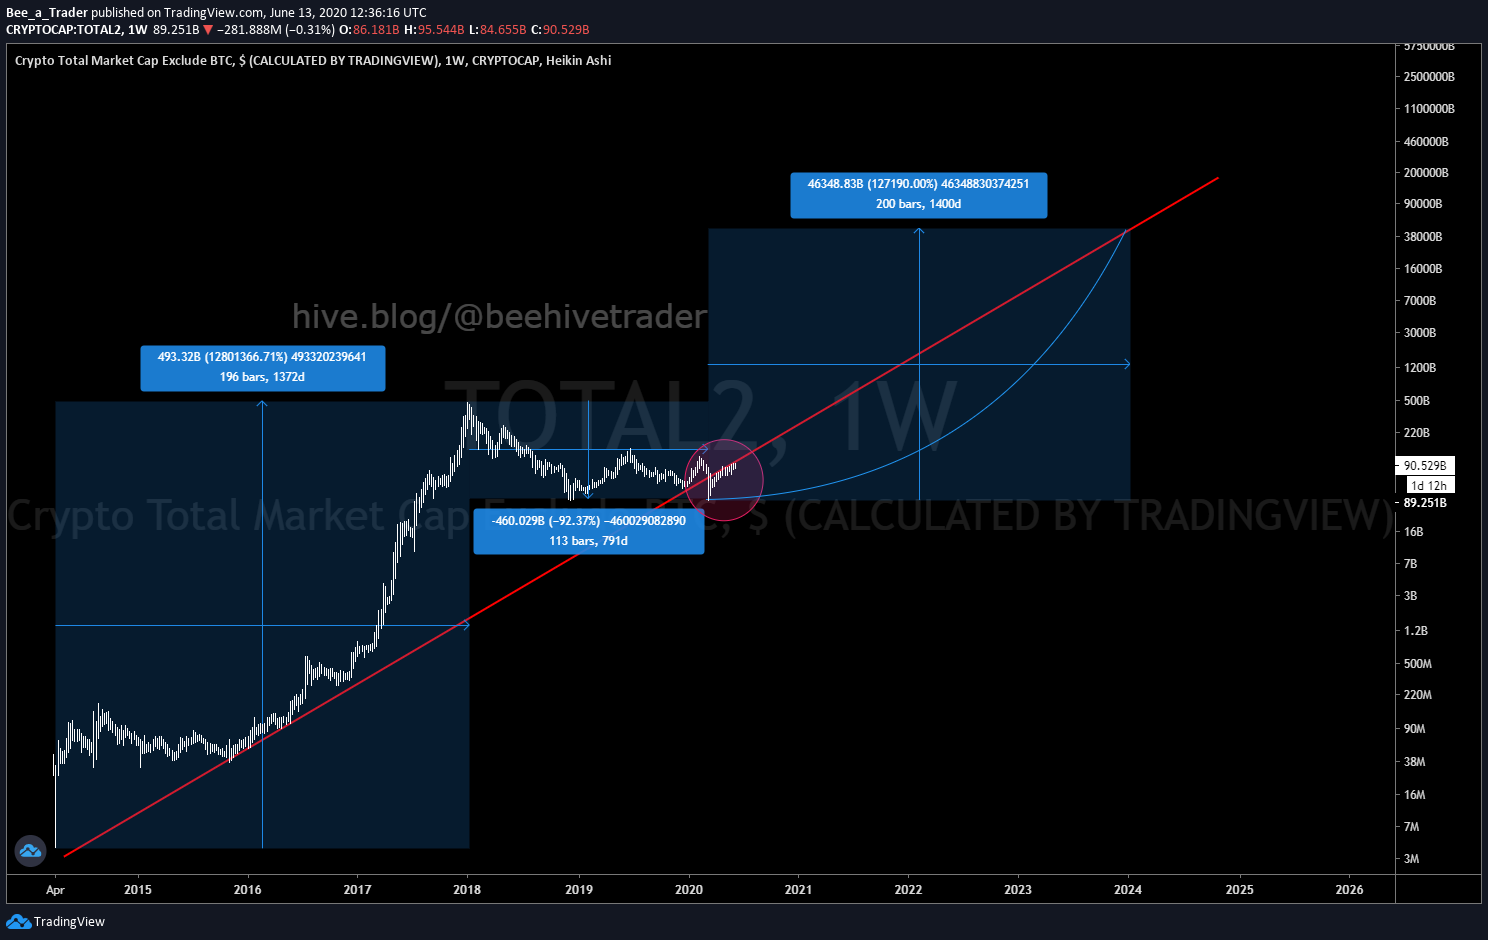 An almost 120000% gain from the bottom, on a bearish retest at next peak?